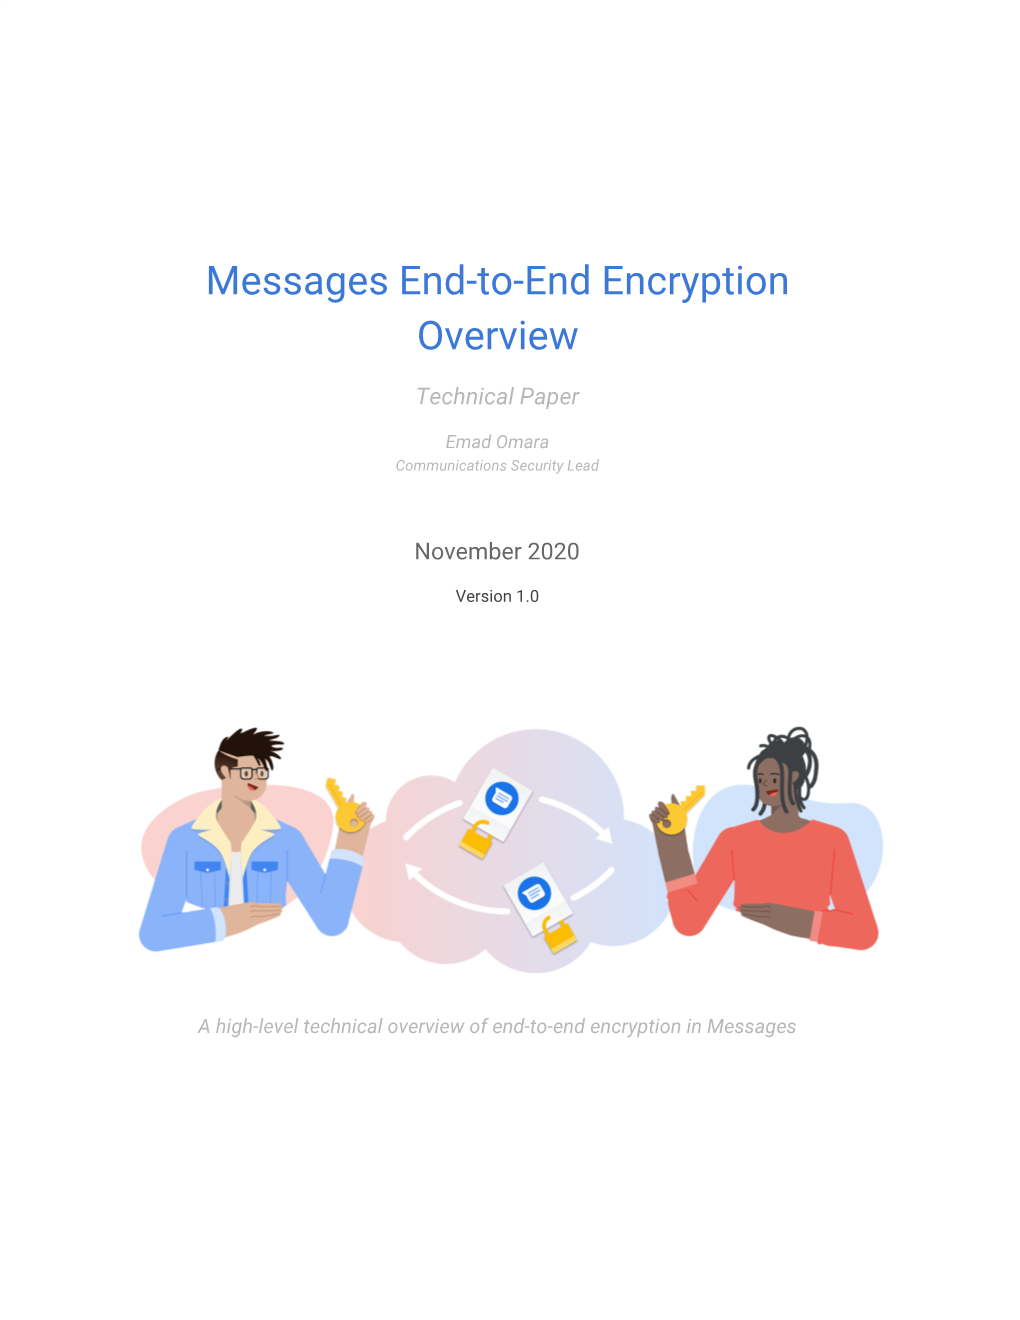 Messages End-To-End Encryption Overview